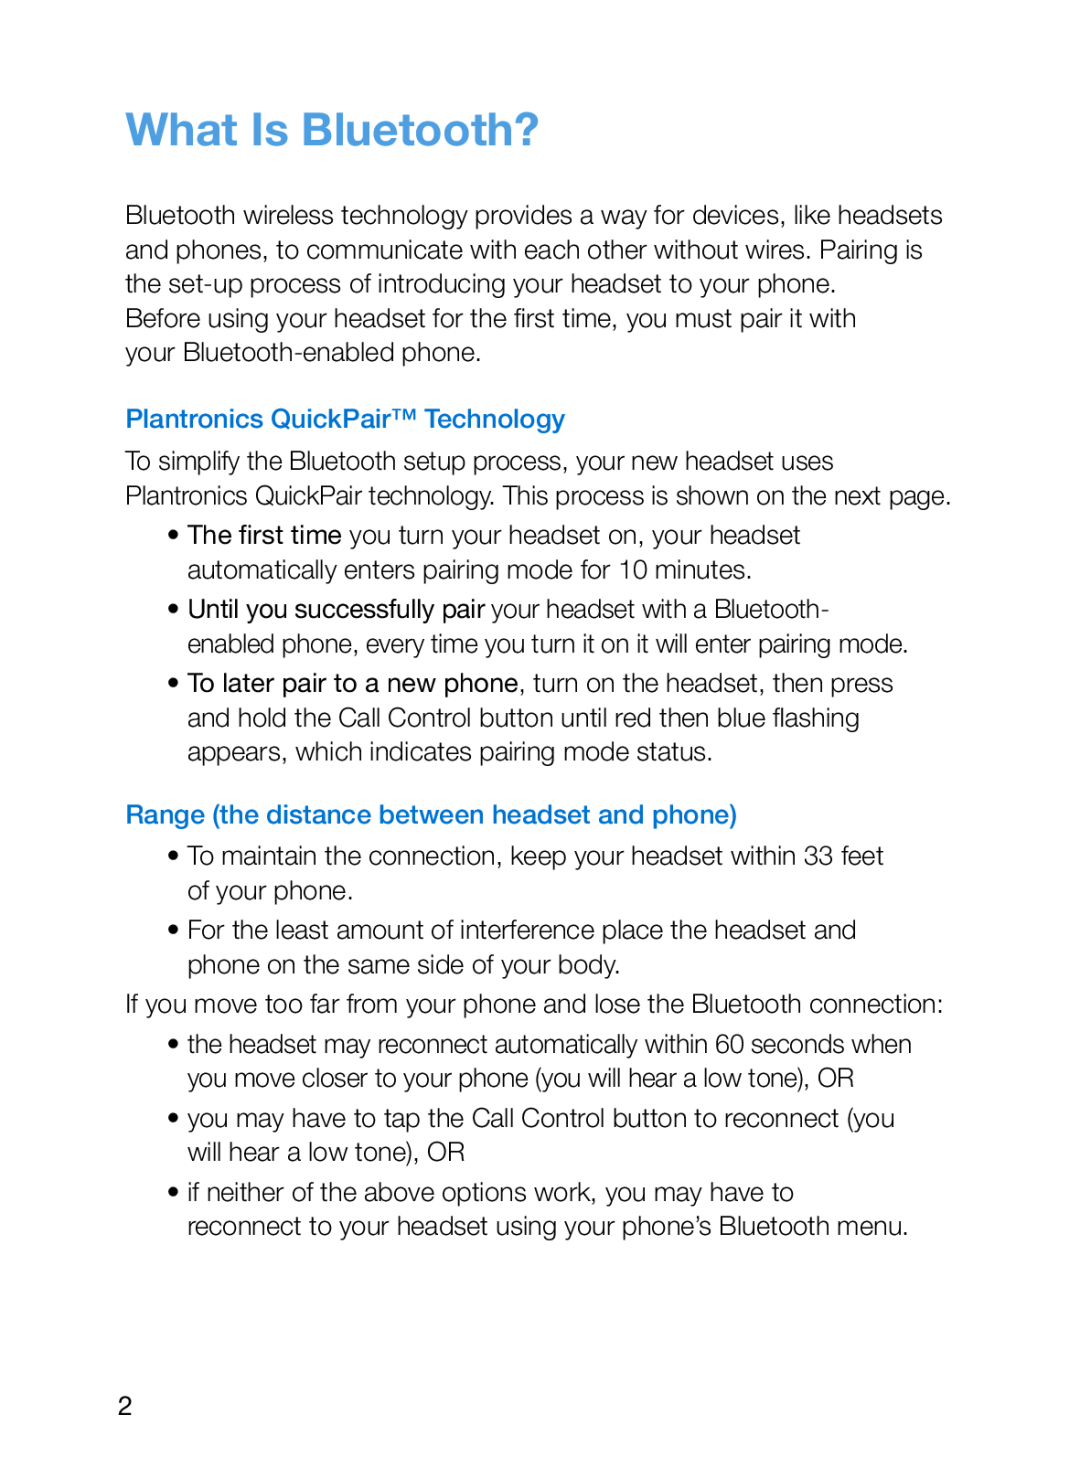 Plantronics 243, 245 What Is Bluetooth?, Plantronics QuickPair Technology, Range the distance between headset and phone 